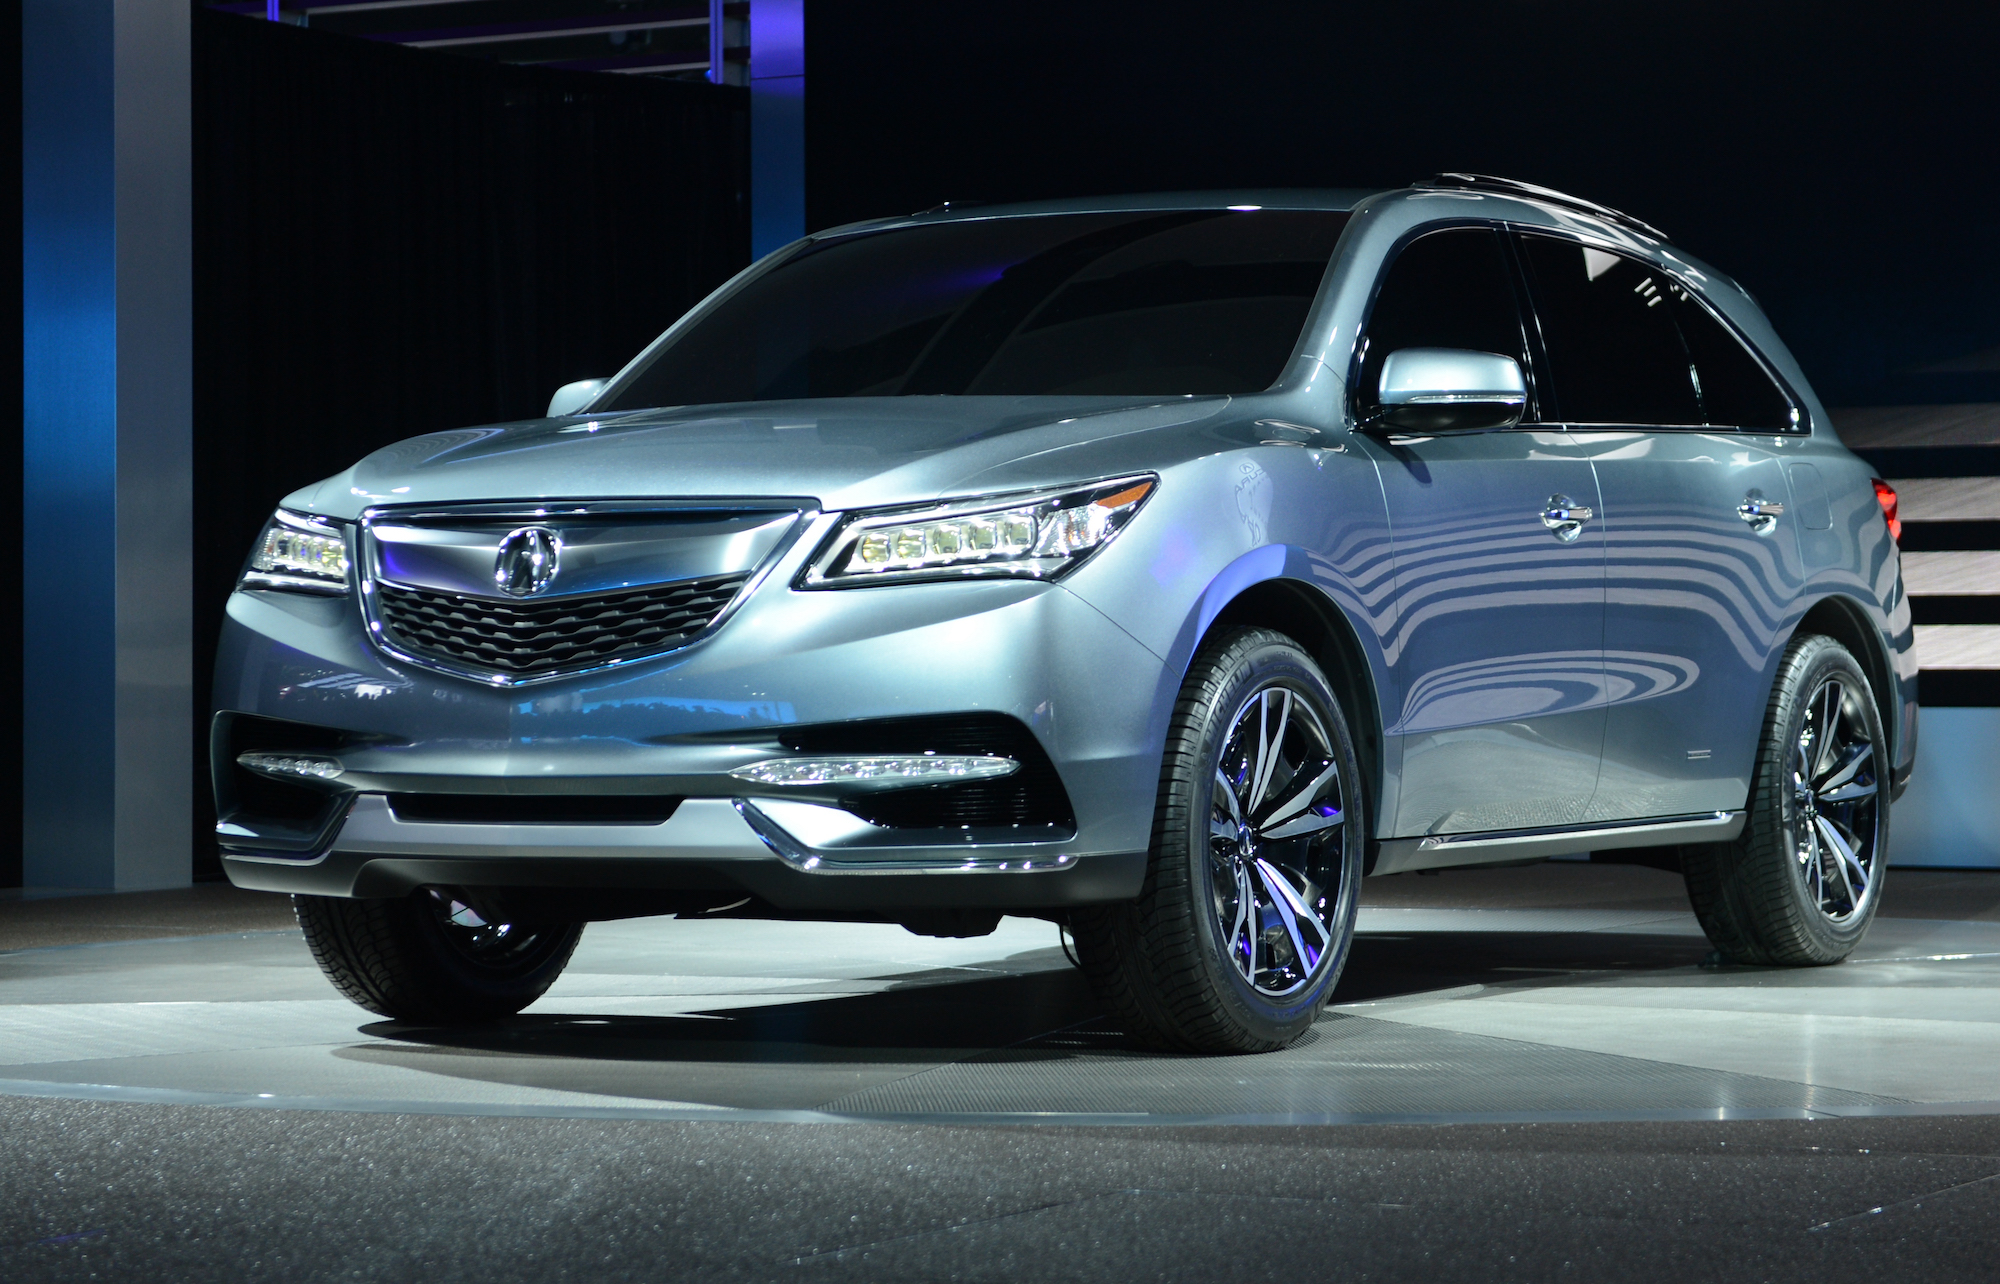 A light-blue metallic 2013 Acura MDX at the 2013 North American International Auto Show in Detroit, Michigan